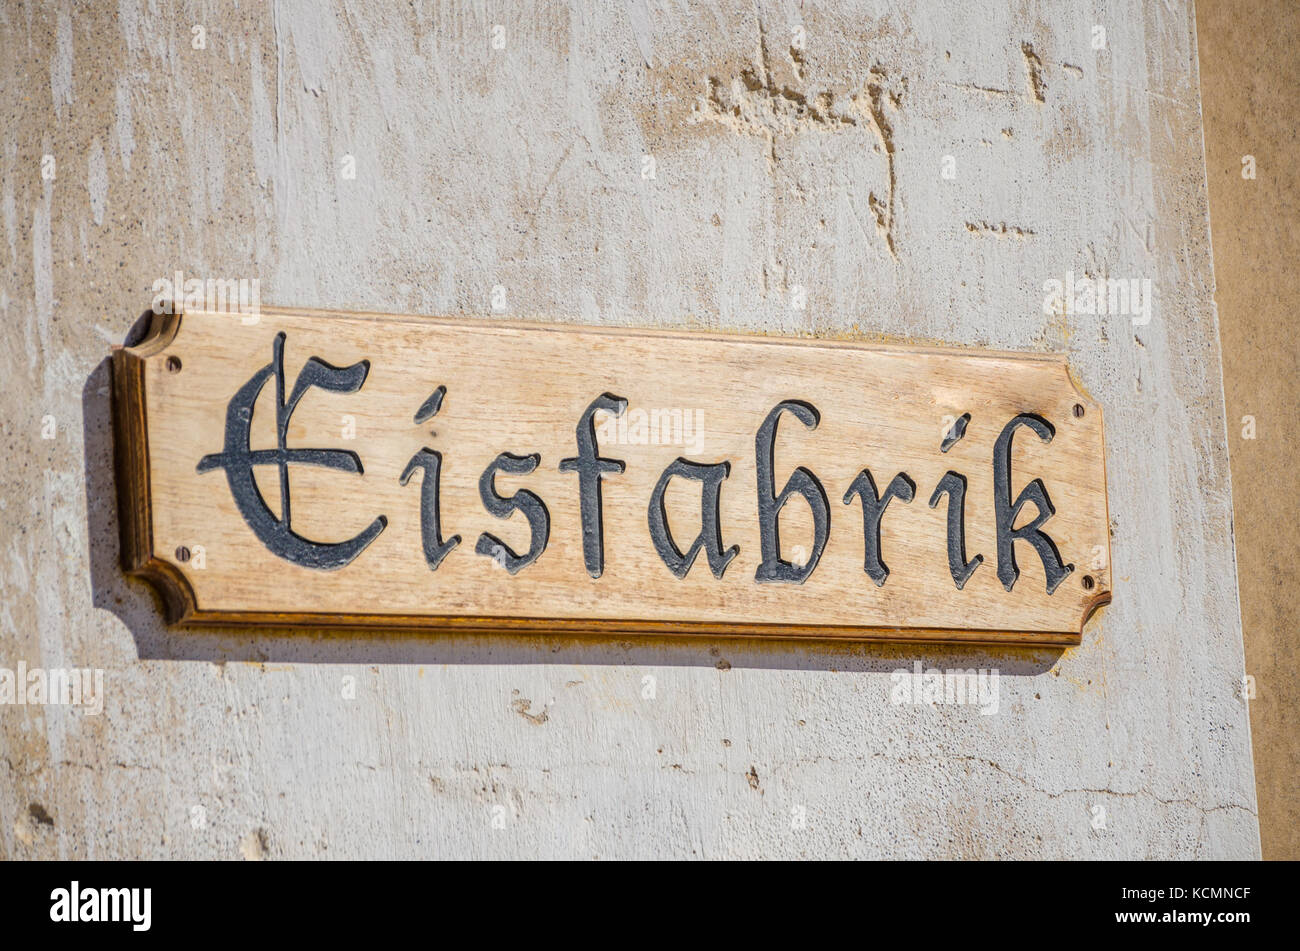 Wooden Eisfabrik or ice factory sign at ghost town Kolmanskop near Luderitz, Namibia, Southern Africa Stock Photo